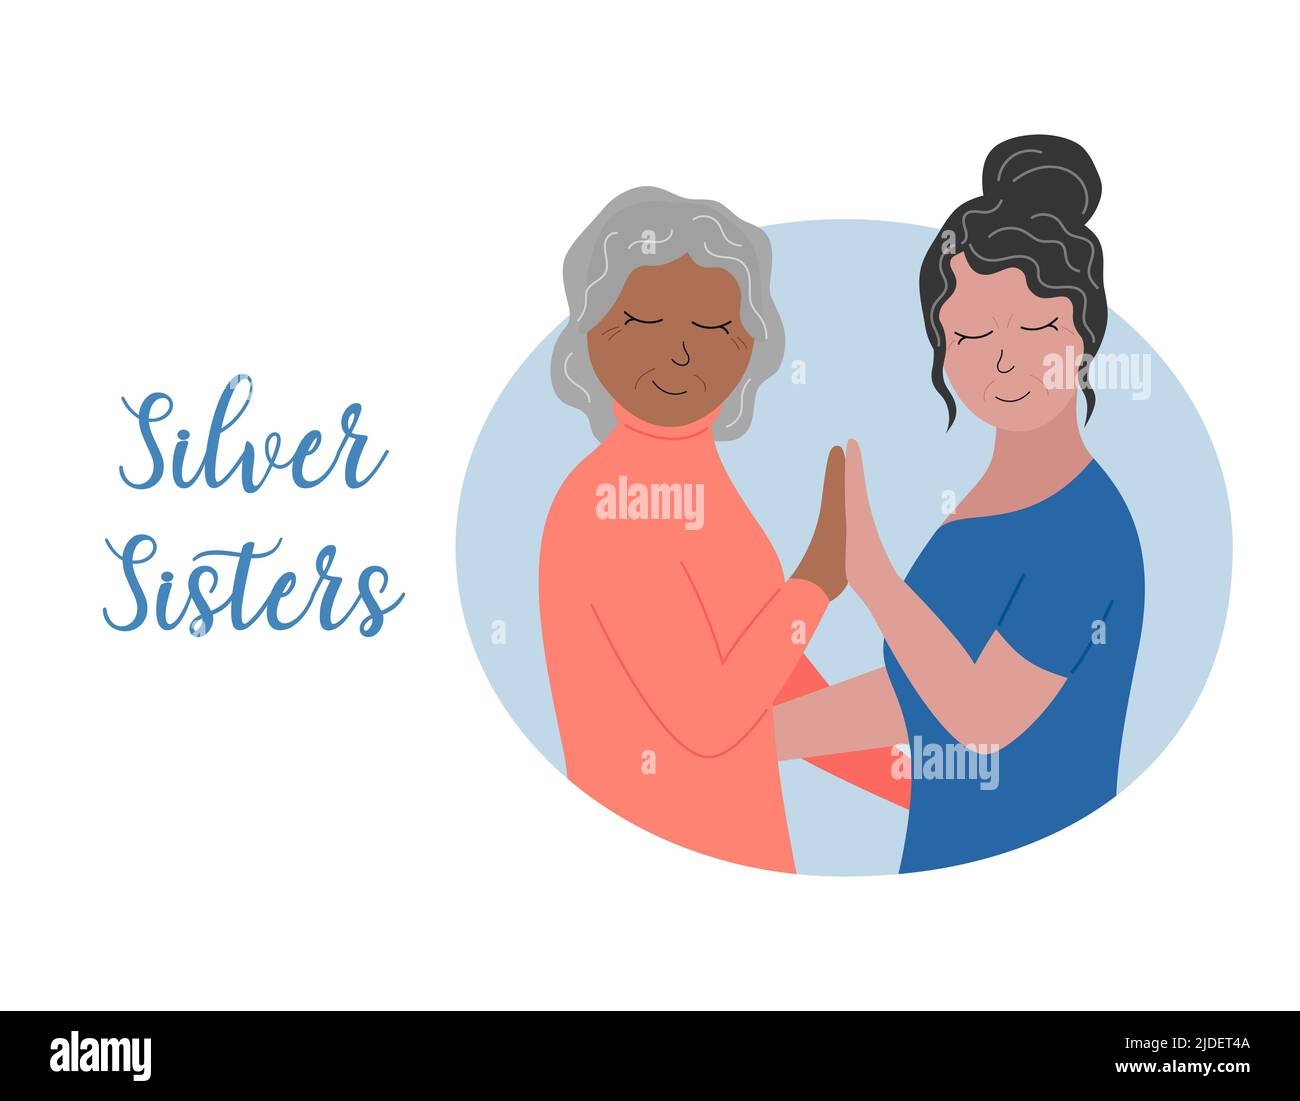 Senior women with gray hair together. Silver sisters concept. Female friendship. Elderly women are proud of age and hair color. Flat vector illustrati Stock Vector